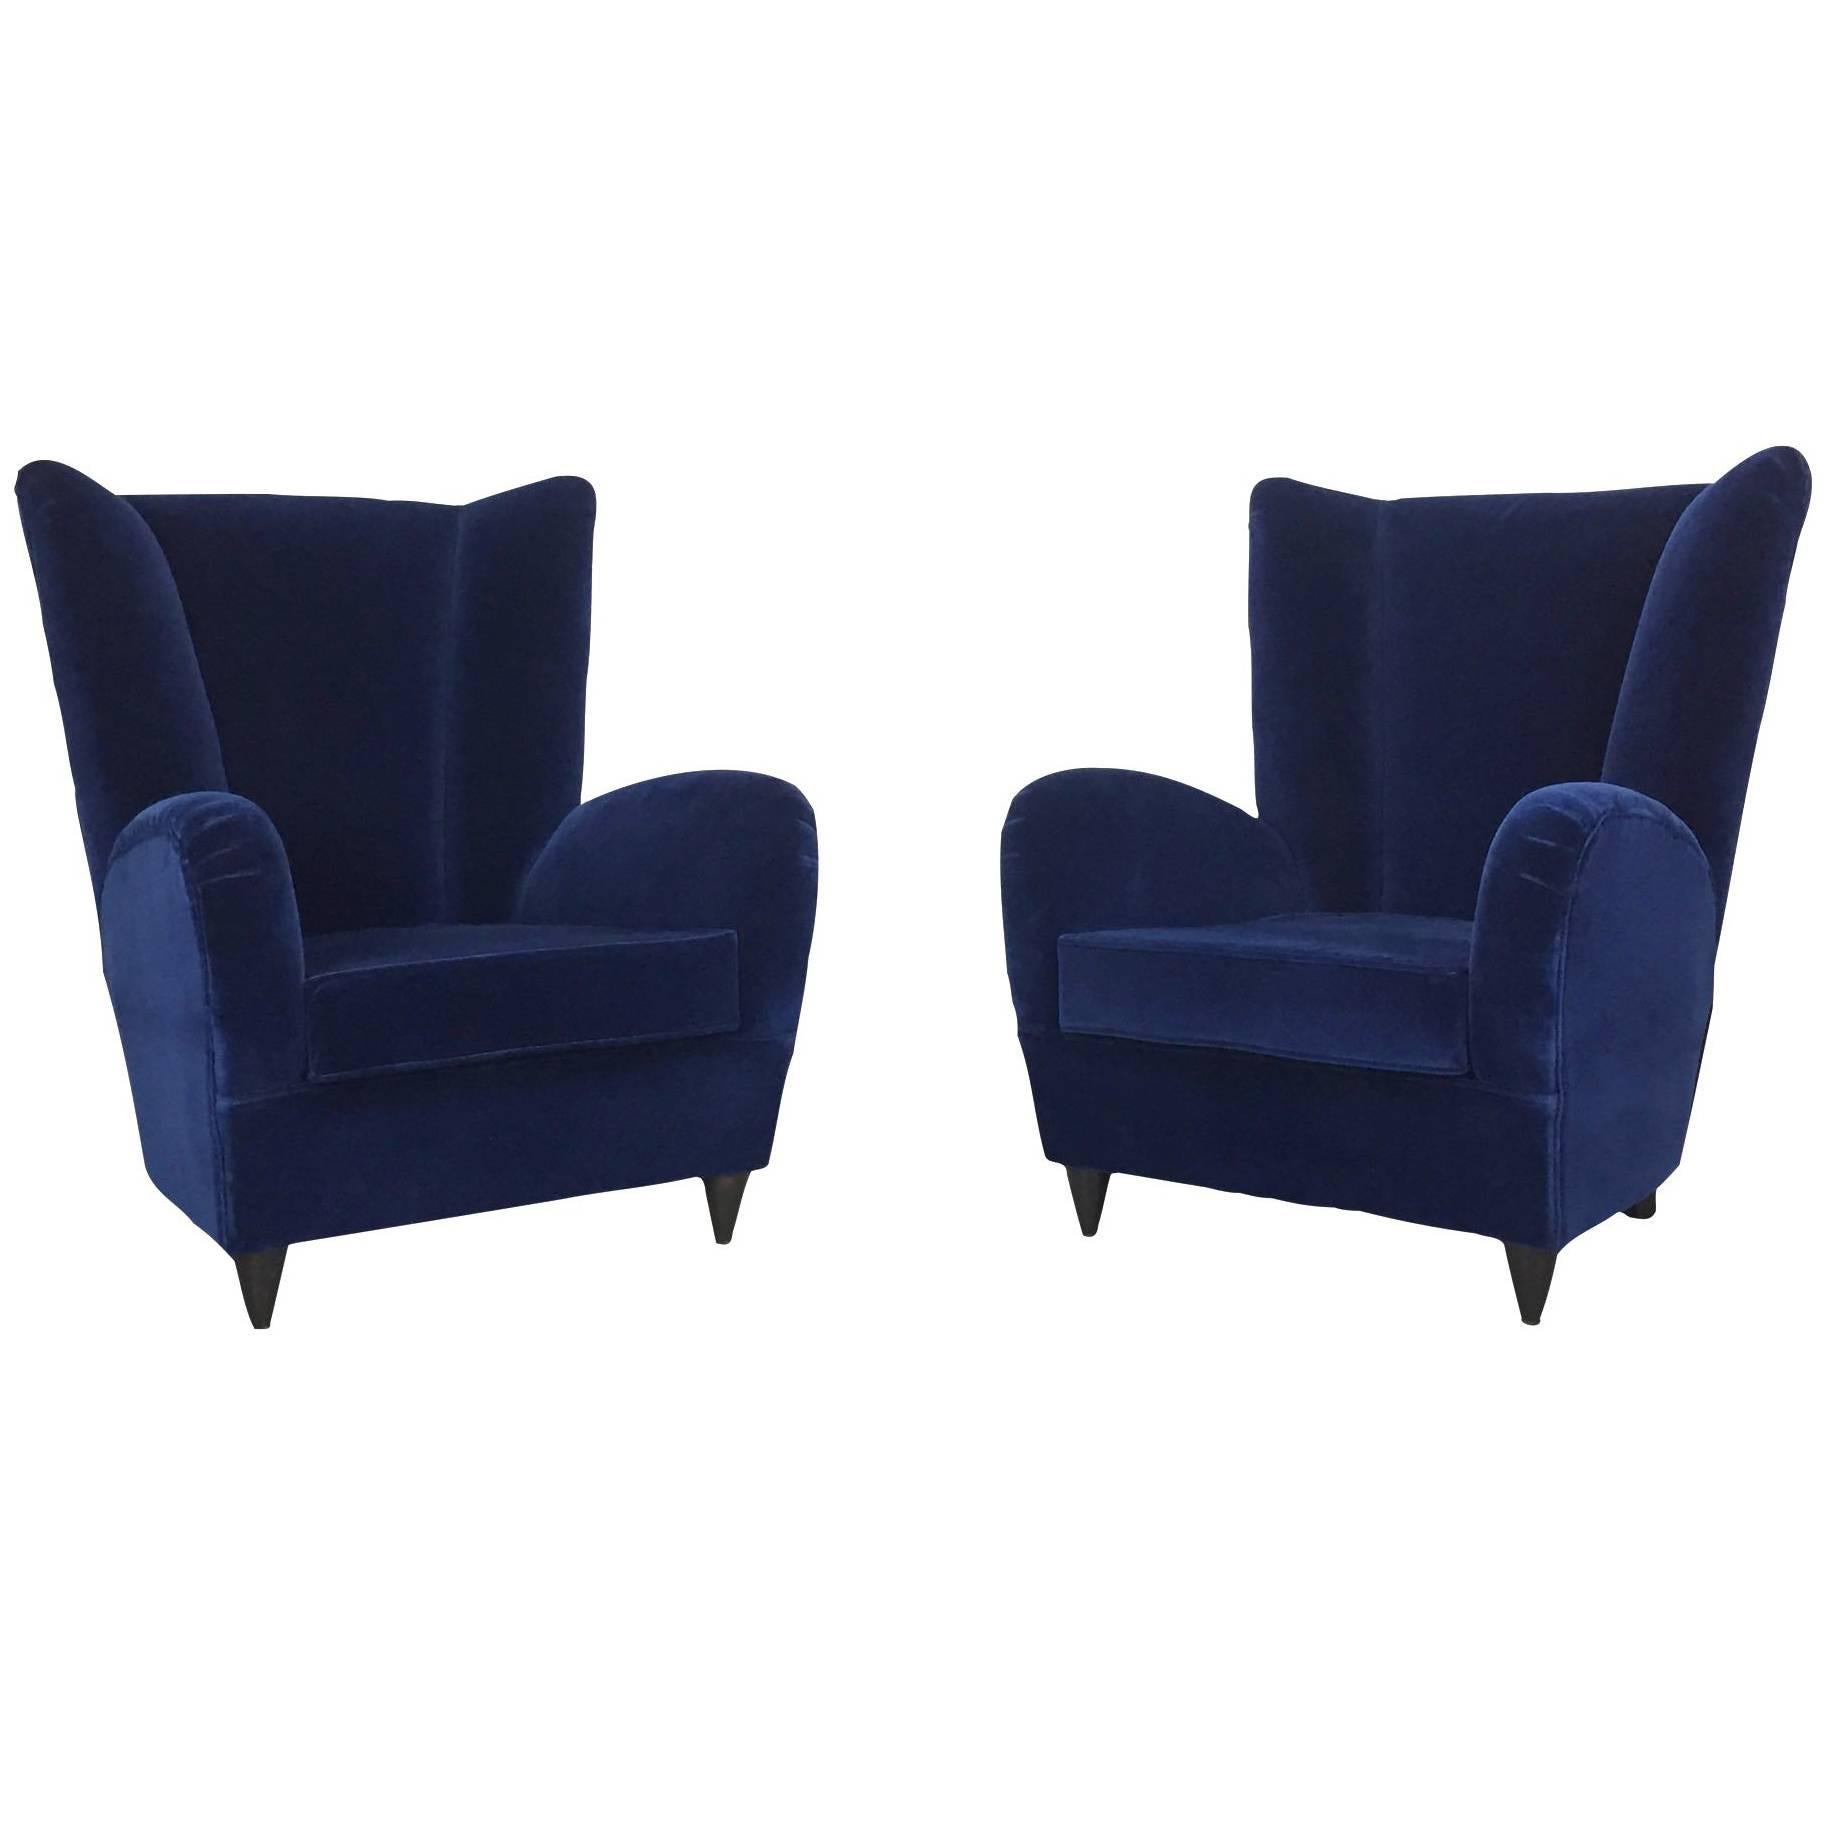 Paola Buffa Lounge Chairs in Navy Velvet, a Pair